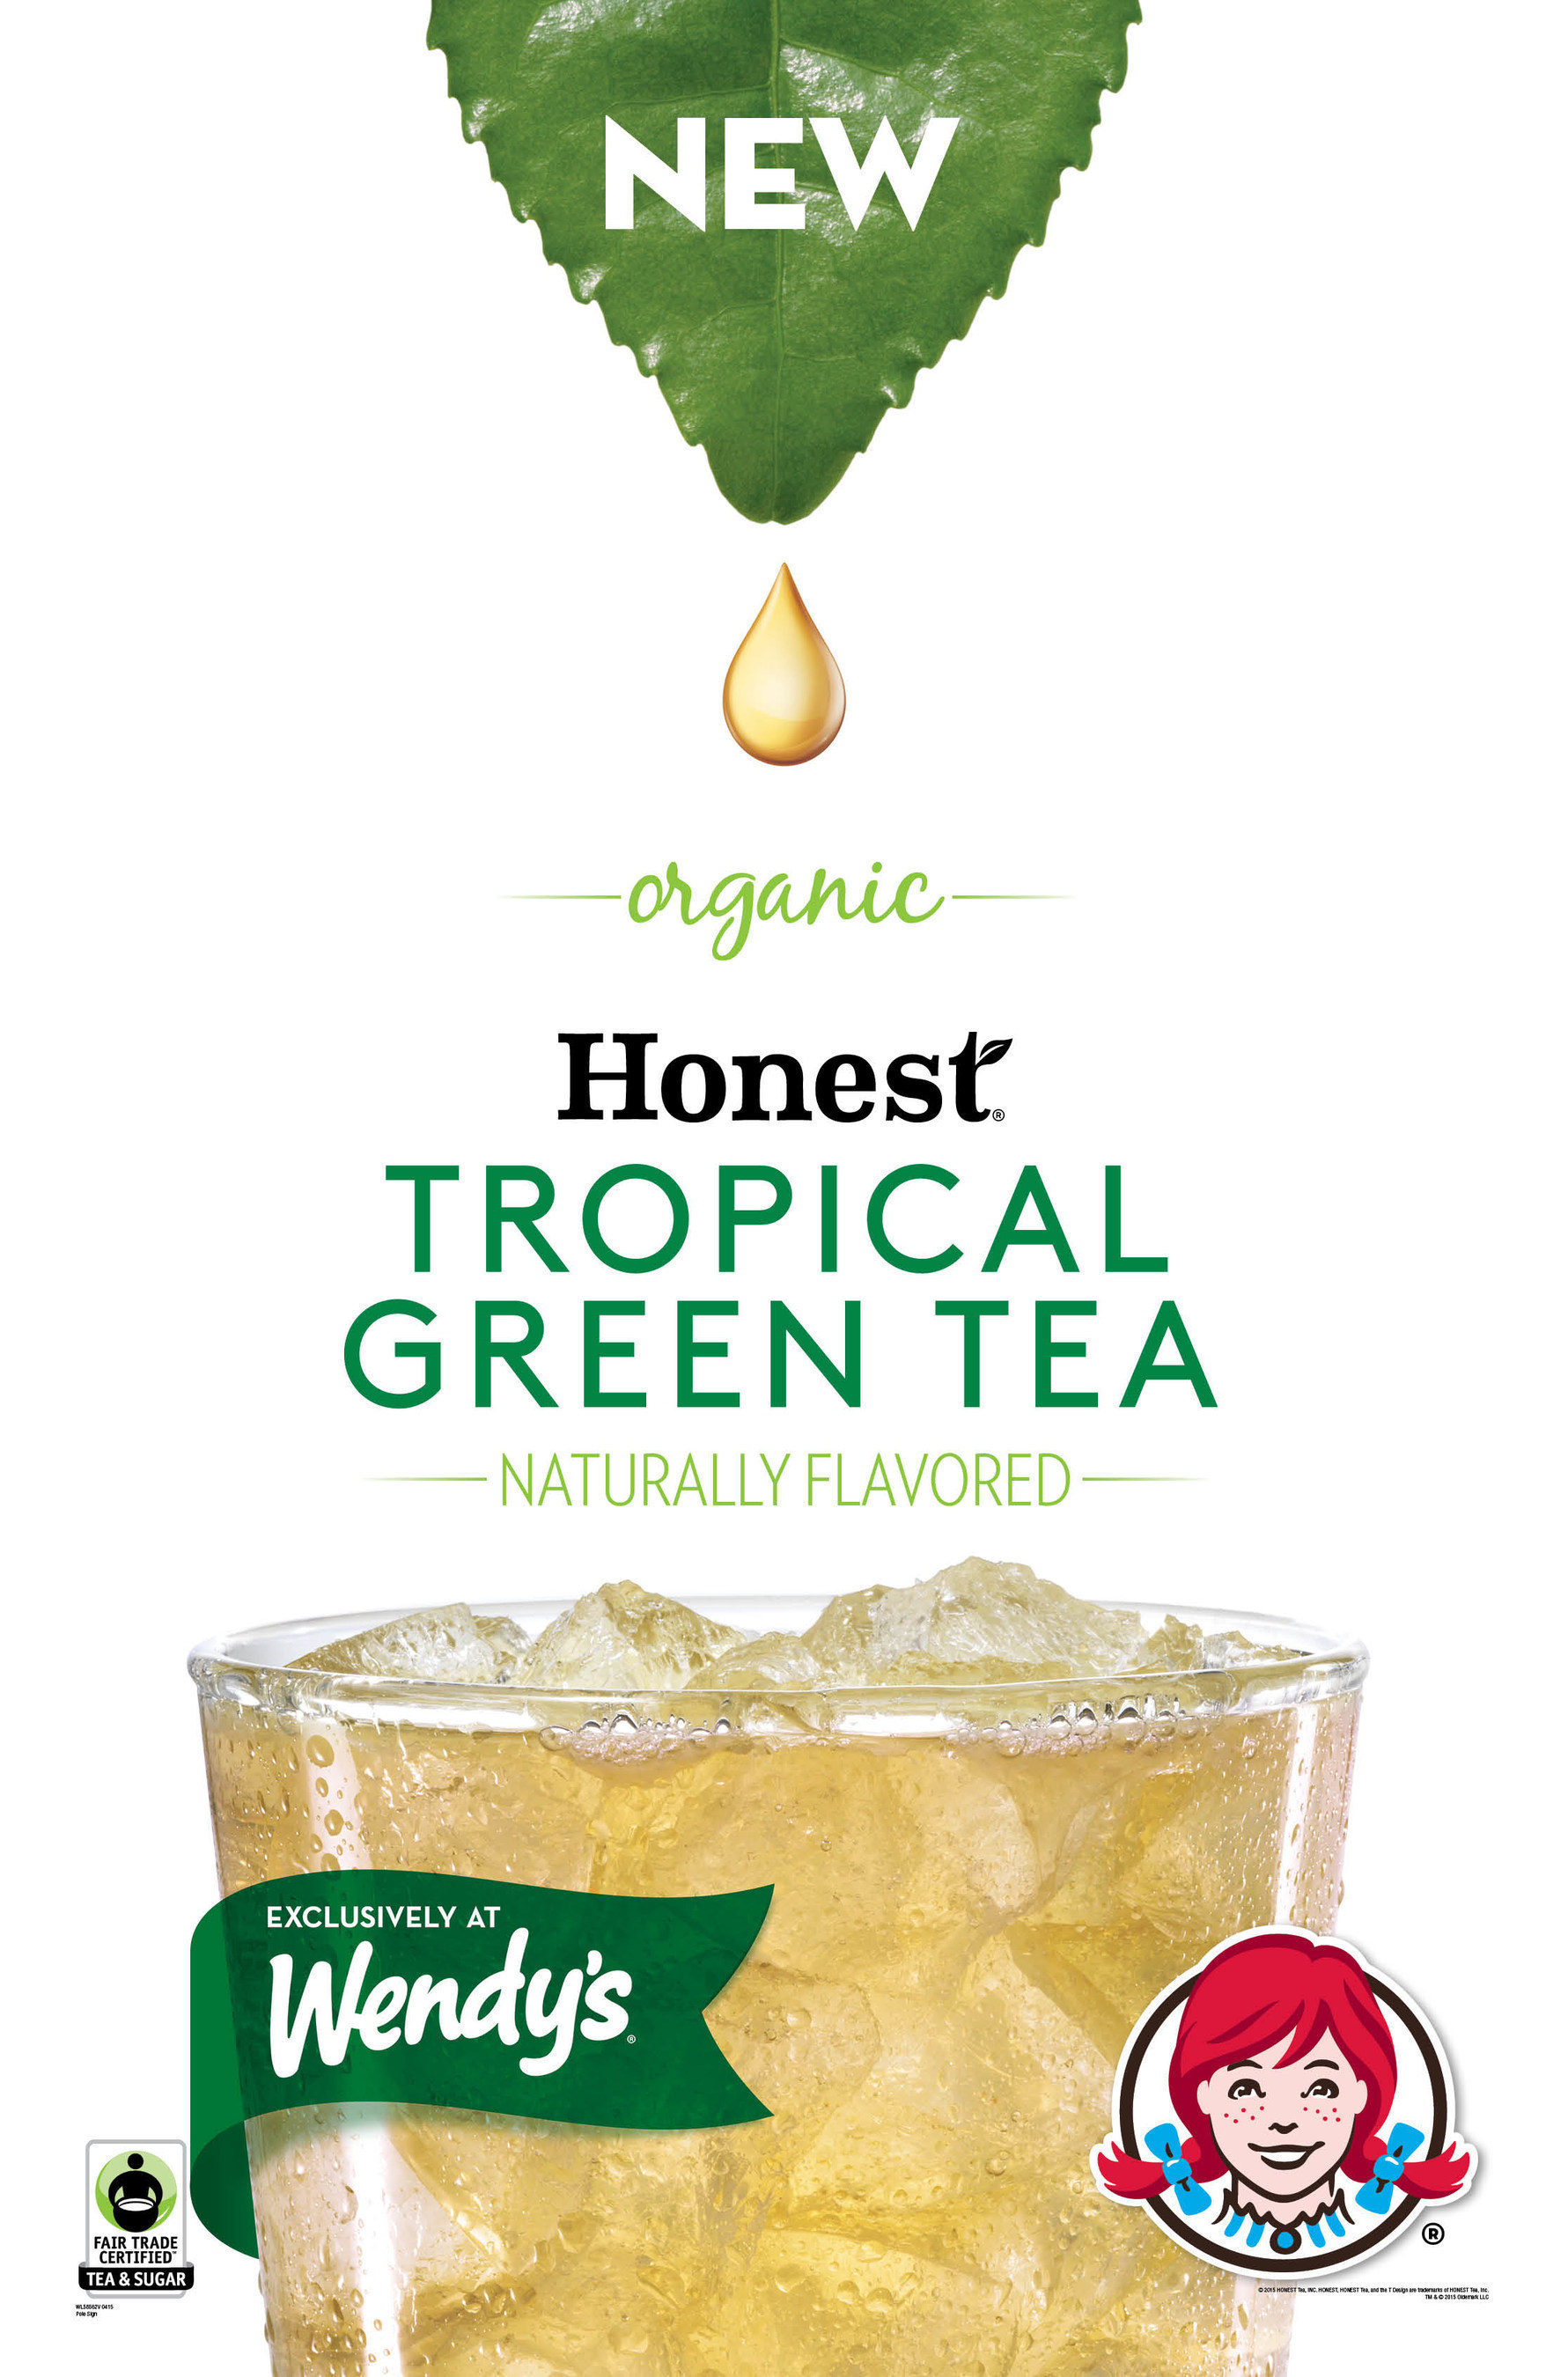 Wendy's and Honest Tea launch exclusive, real-brewed Tropical Green Tea at Wendy's restaurants nationwide.  Brewed daily at Wendy's restaurants, the proprietary iced tea blend features Fair Trade Certified, organic green tea leaves with hints of mango and pineapple flavors, and is sweetened with Fair Trade Certified organic cane sugar.